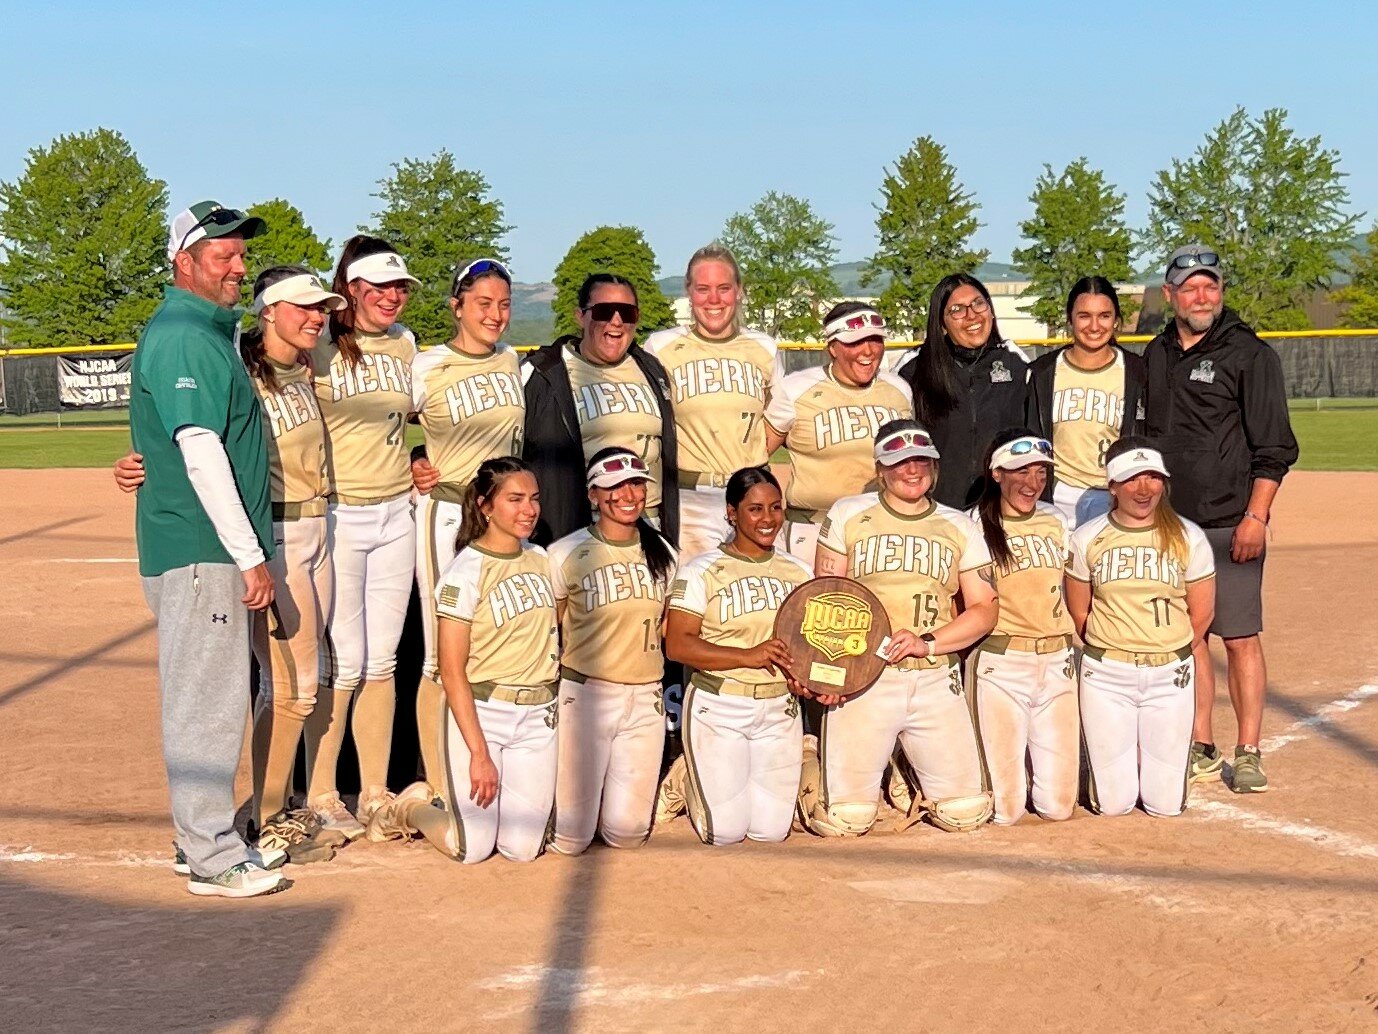 REGION 3B CHAMPS — The Herkimer College Generals softball team won the Region 3B Championship last weekend to advance to the 2023 NJCAA Division III Softball World Series that began Wednesday and runs through Saturday in DeWitt. The Generals won the 2013 national championship, and this is their 11th straight national tournament appearance. Herkimer is fifth in NJCAA DIII rankings with a record of 27-7.